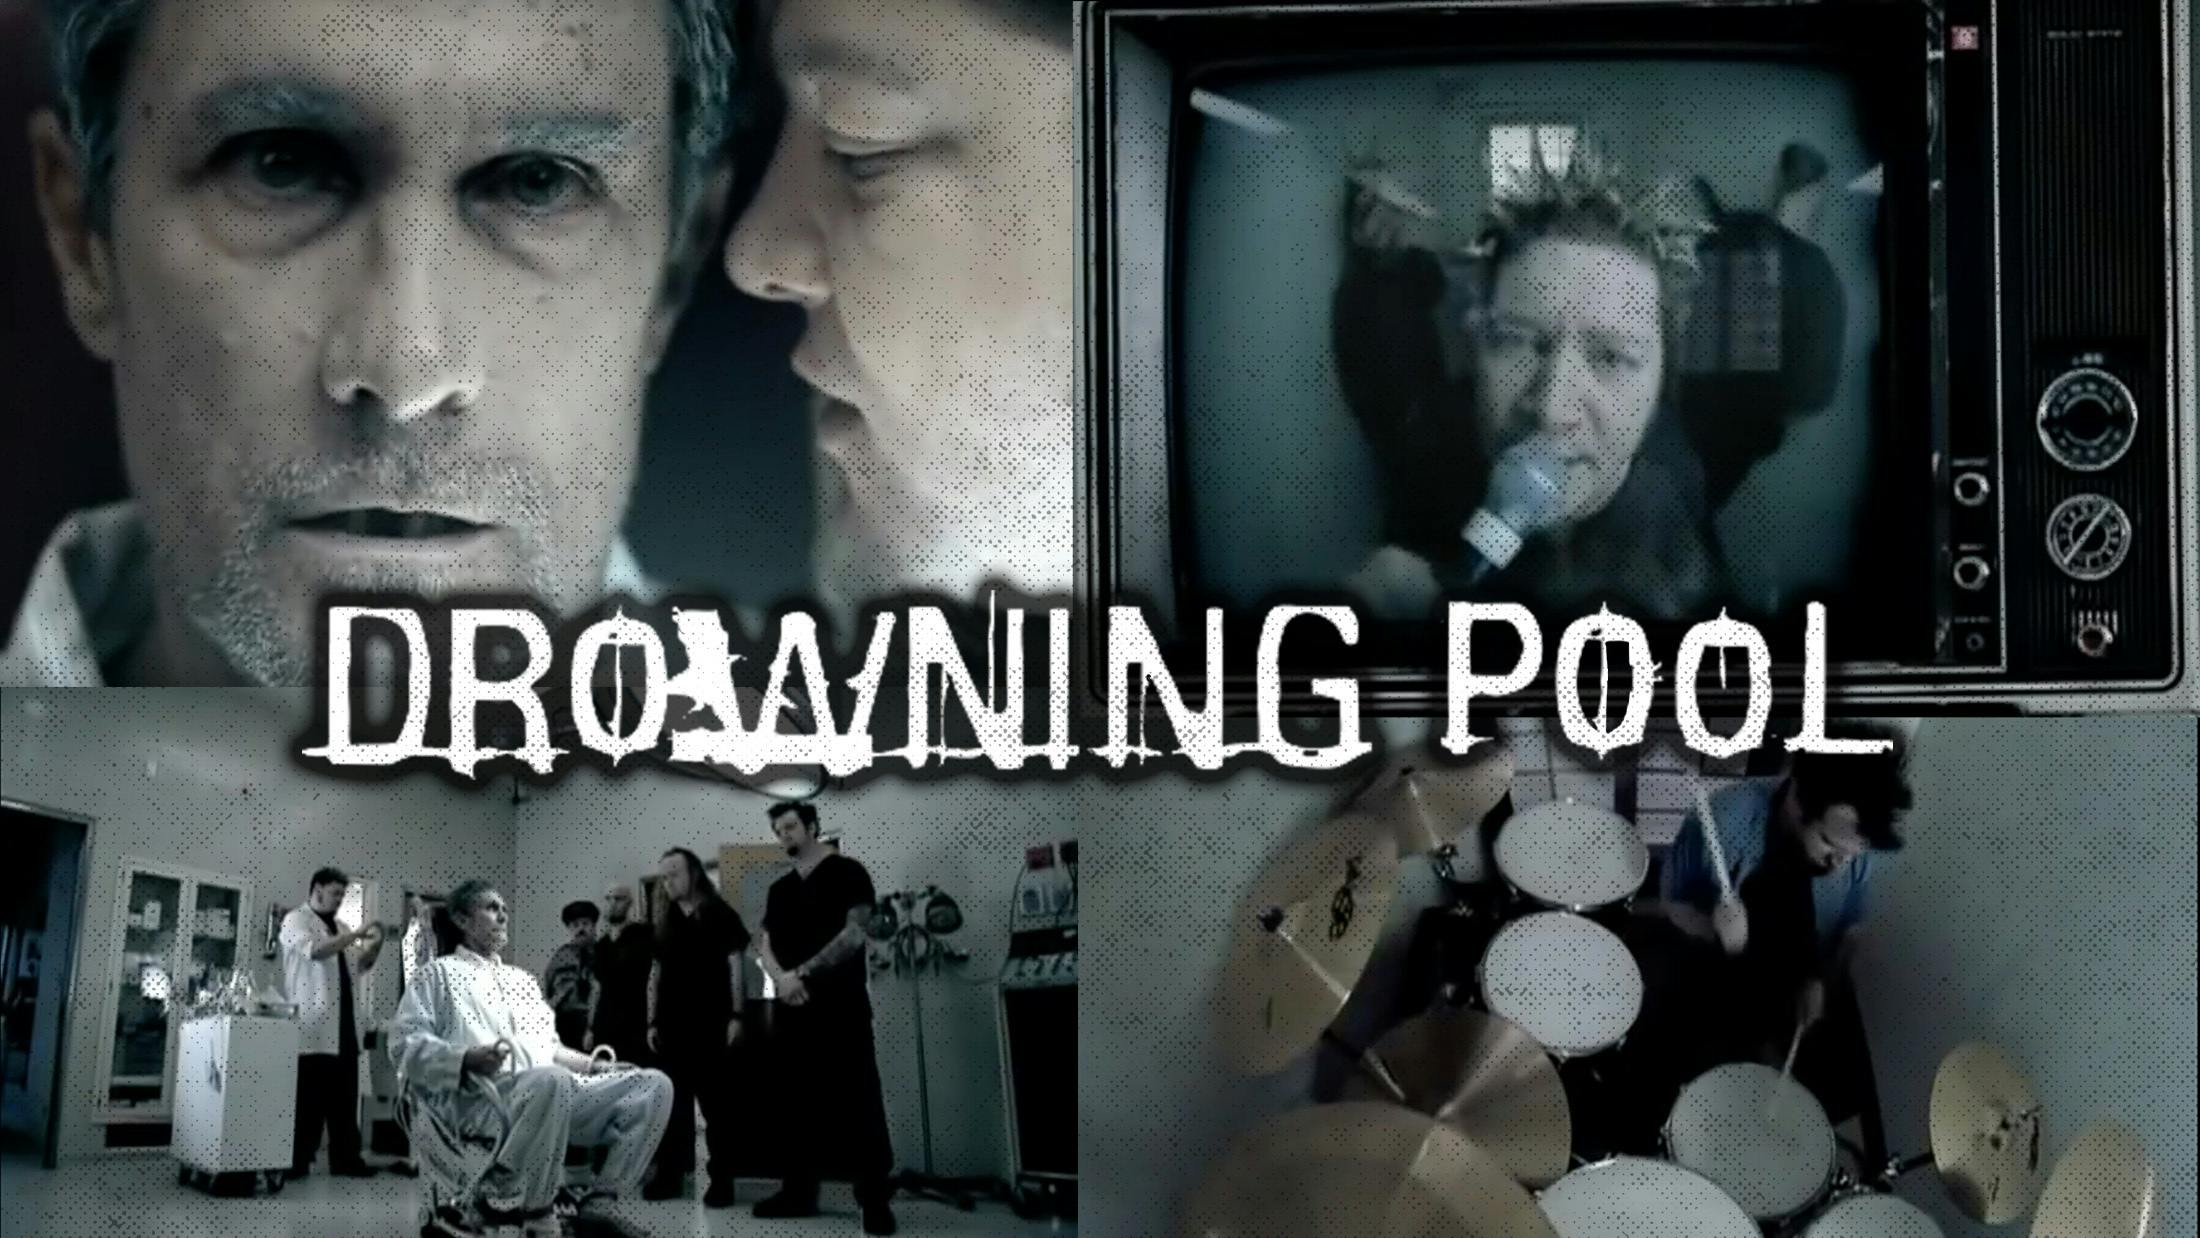 A Deep Dive Into Drowning Pool's Bodies Video